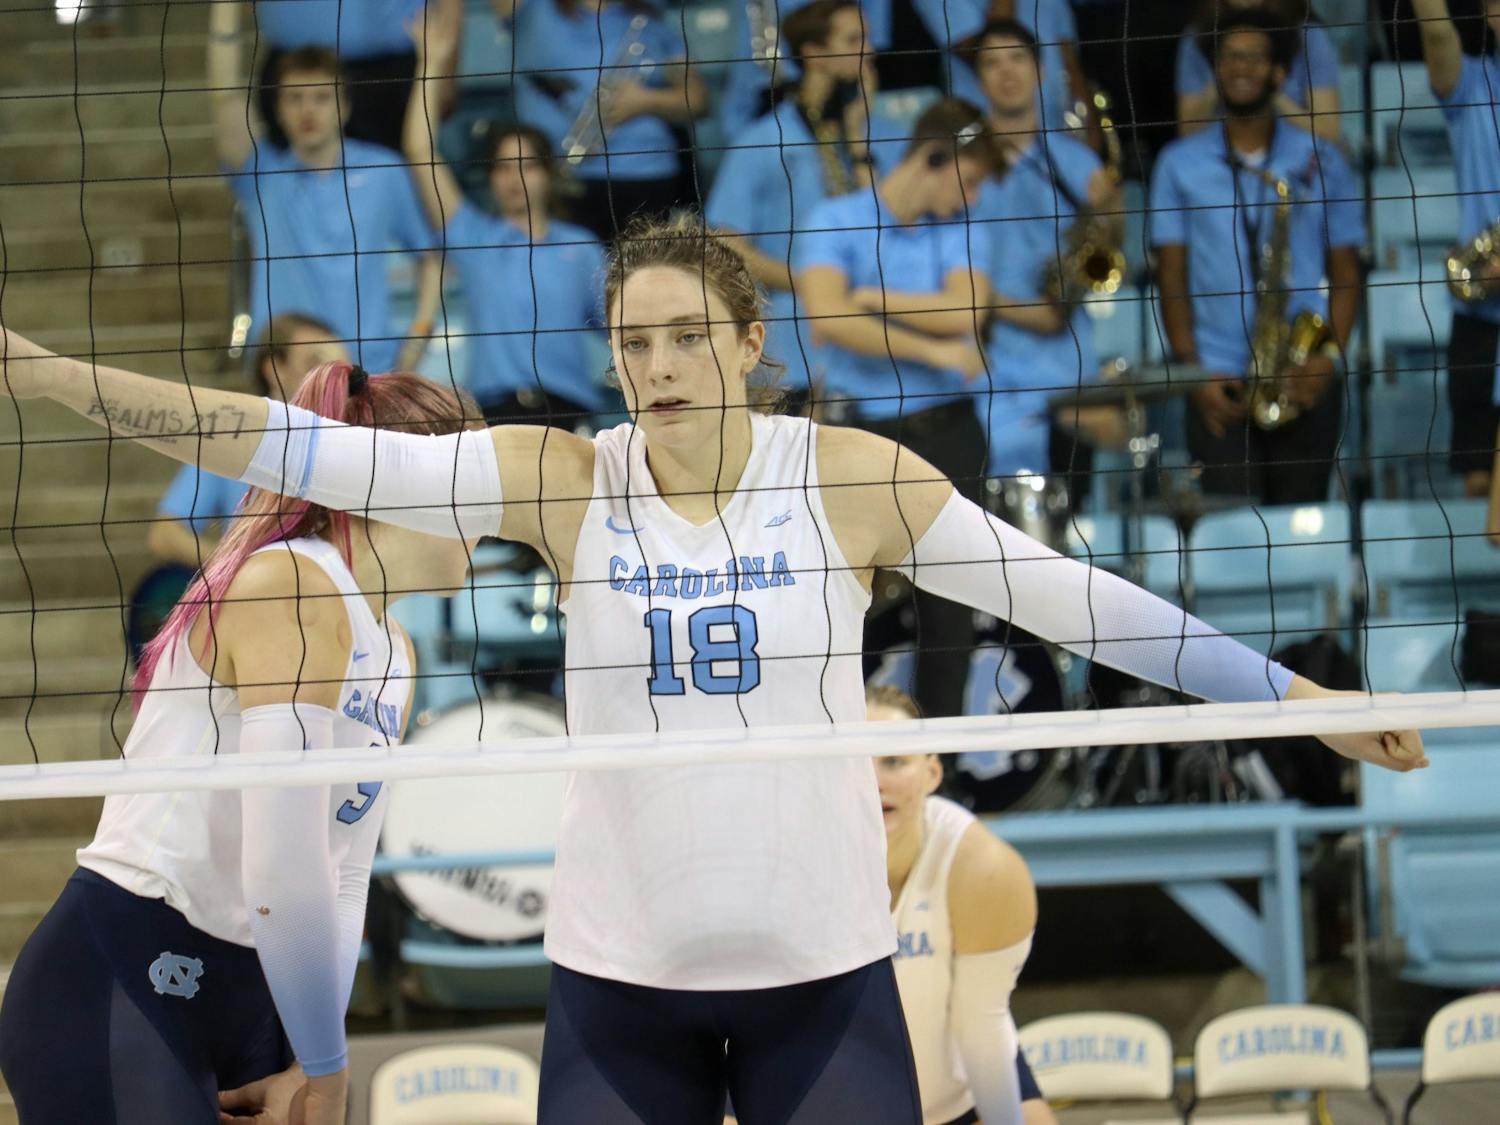 UNC freshman middle hitter Liv Mogridge (18) prepares for the next set during the volleyball match against Georgia Tech on Friday, Oct. 28, 2022 at Carmichael Arena. UNC lost 3-1.